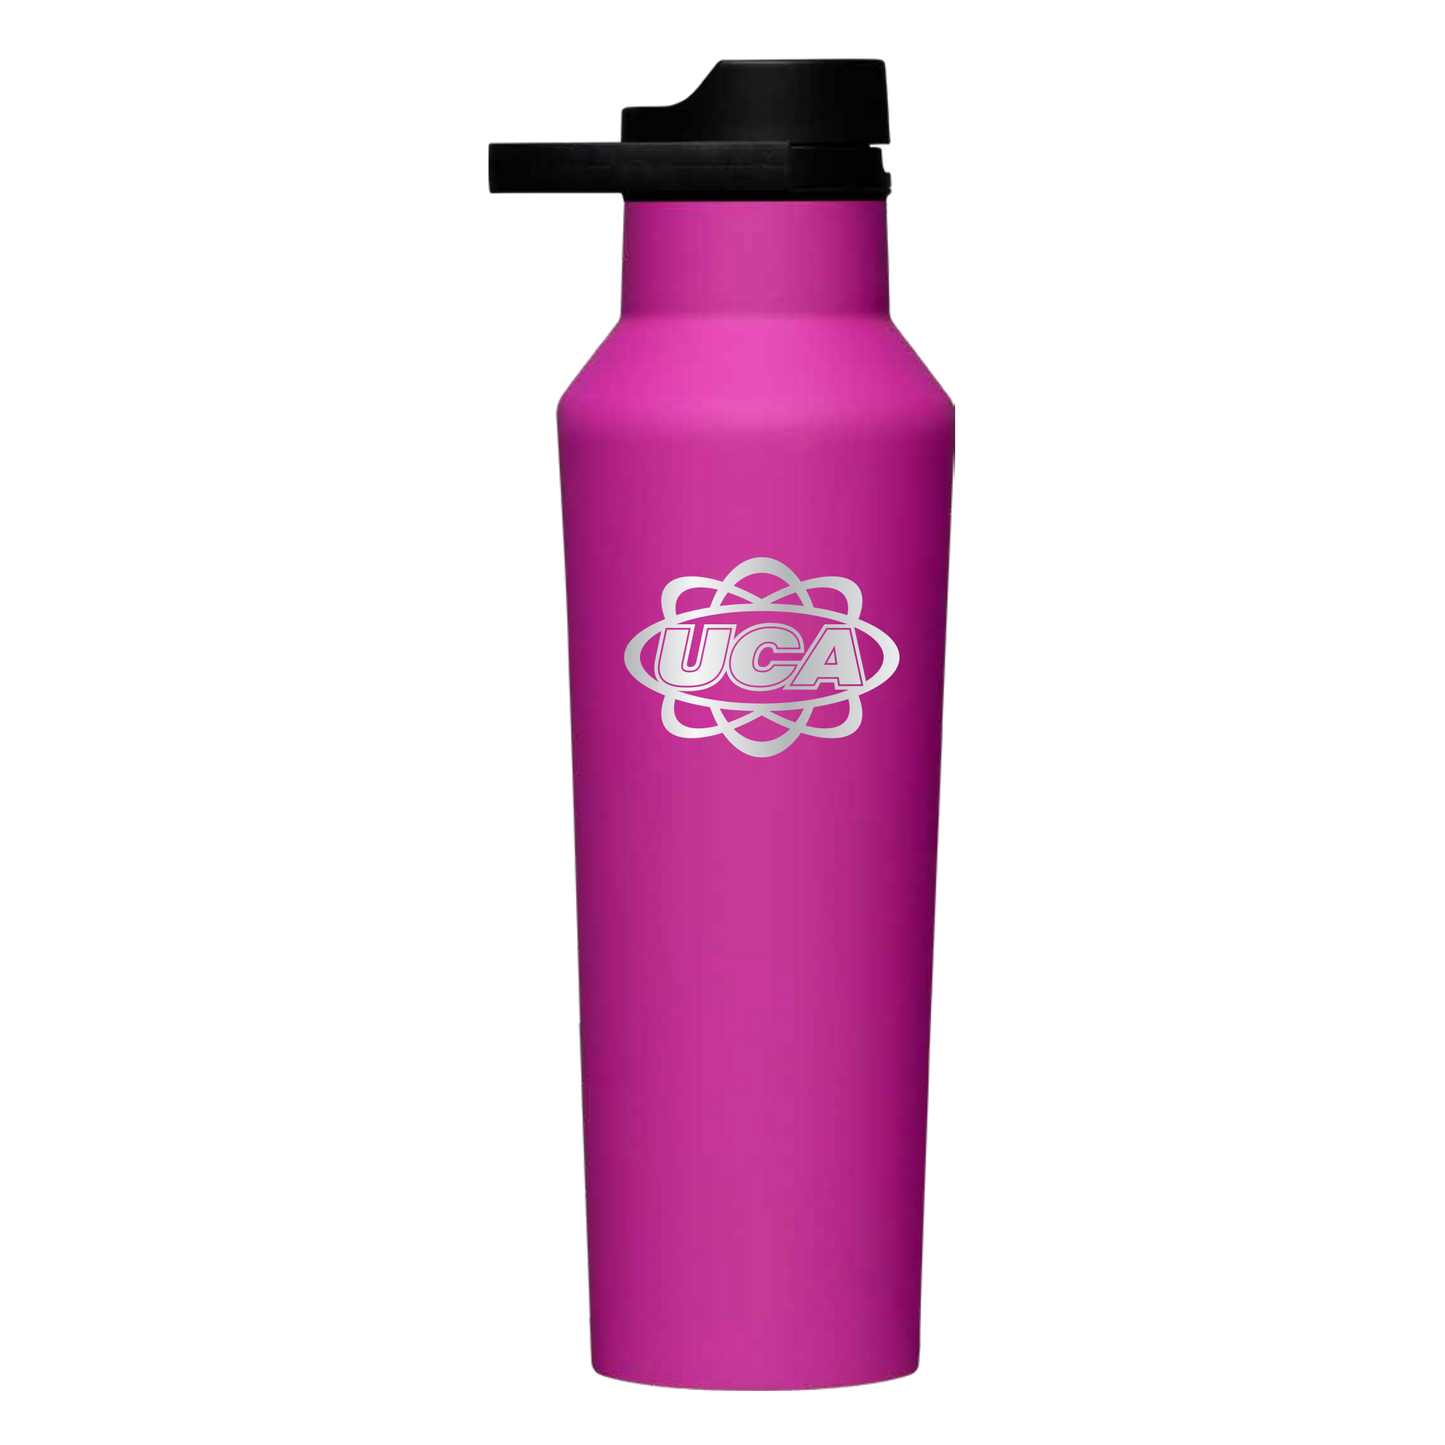 Load image into Gallery viewer, Corkcicle UCA 20Oz Berry Punch Canteen
